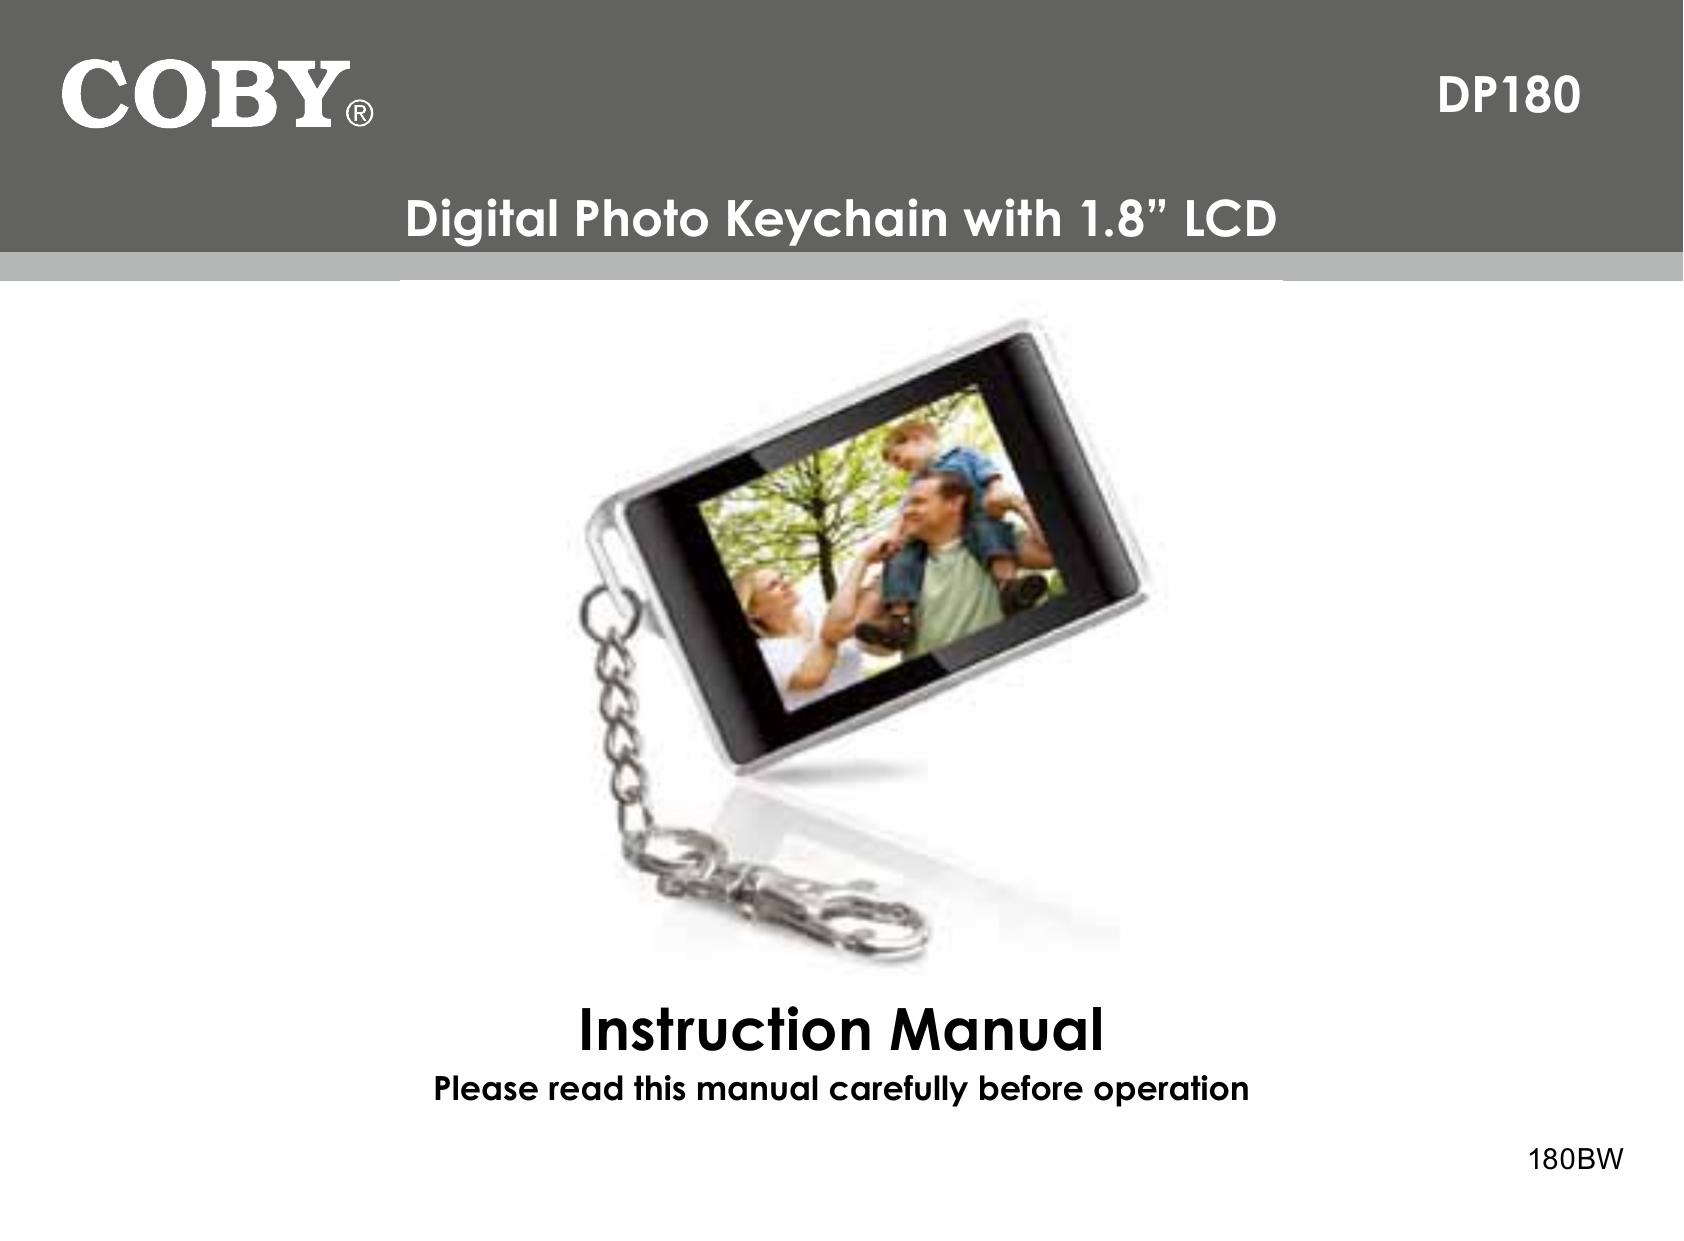 COBY electronic 180BW Digital Photo Keychain User Manual